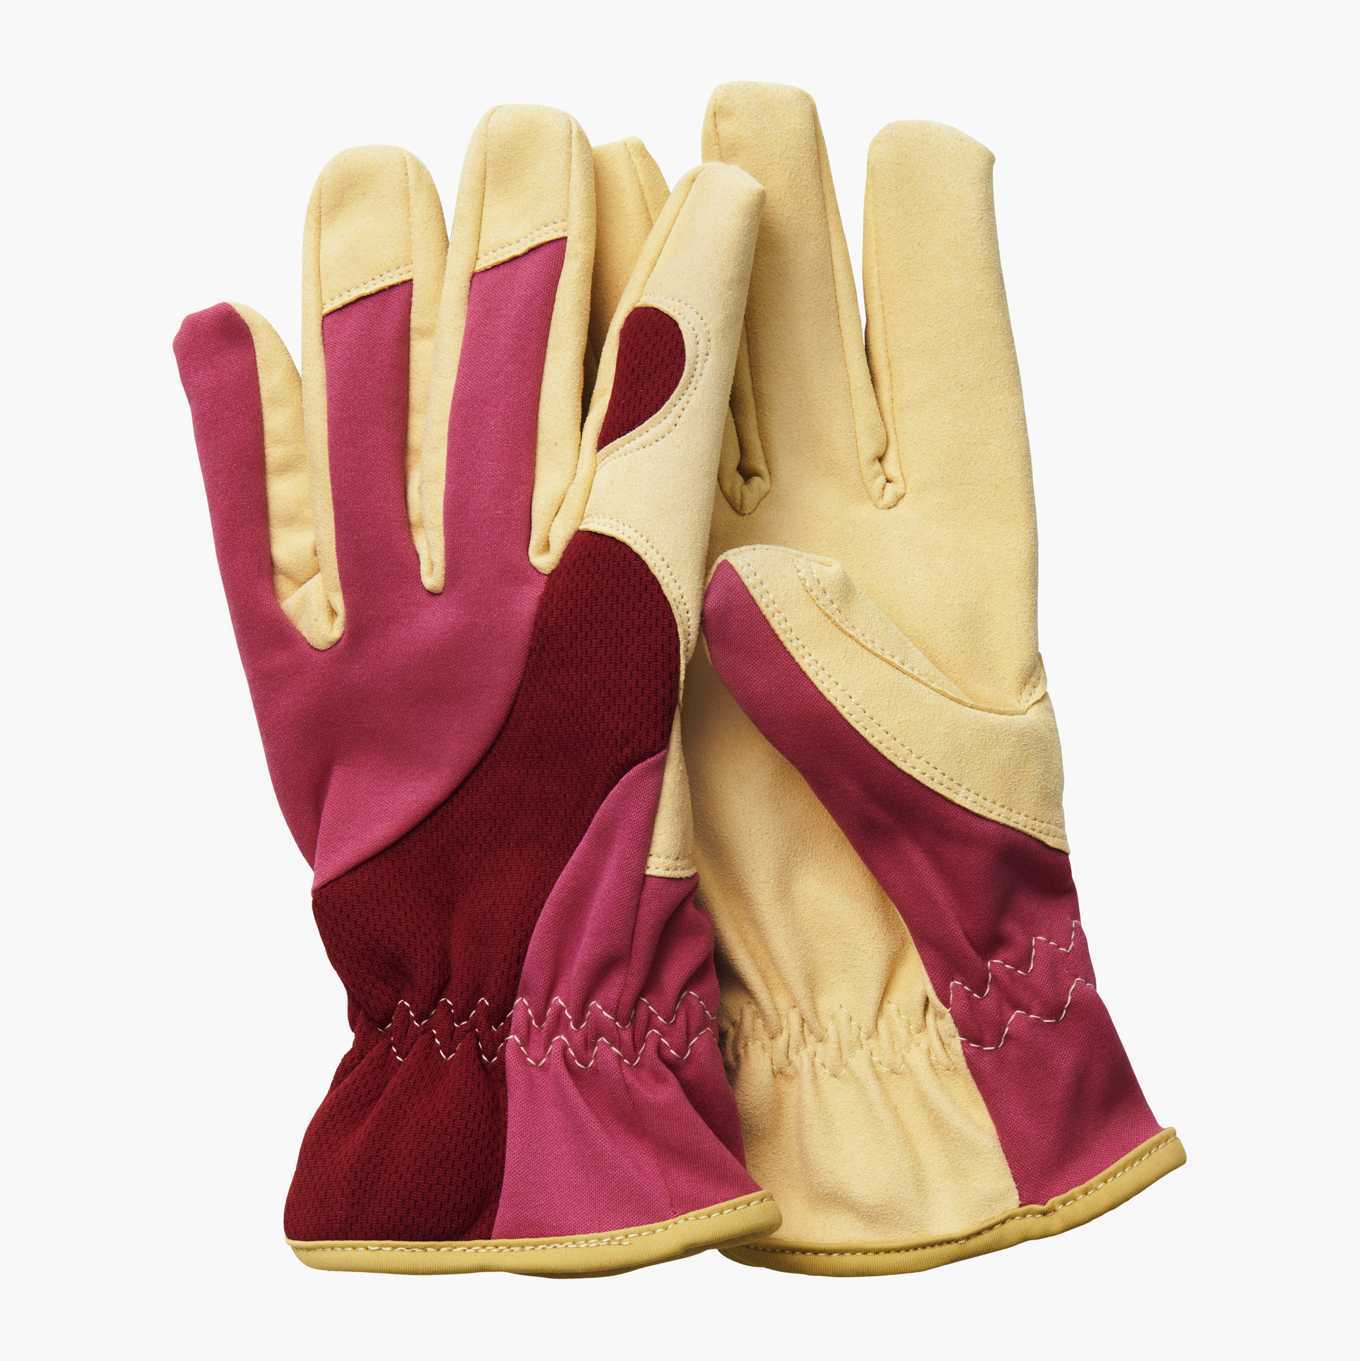 Safety glove, Sports gear, Material property, Gesture